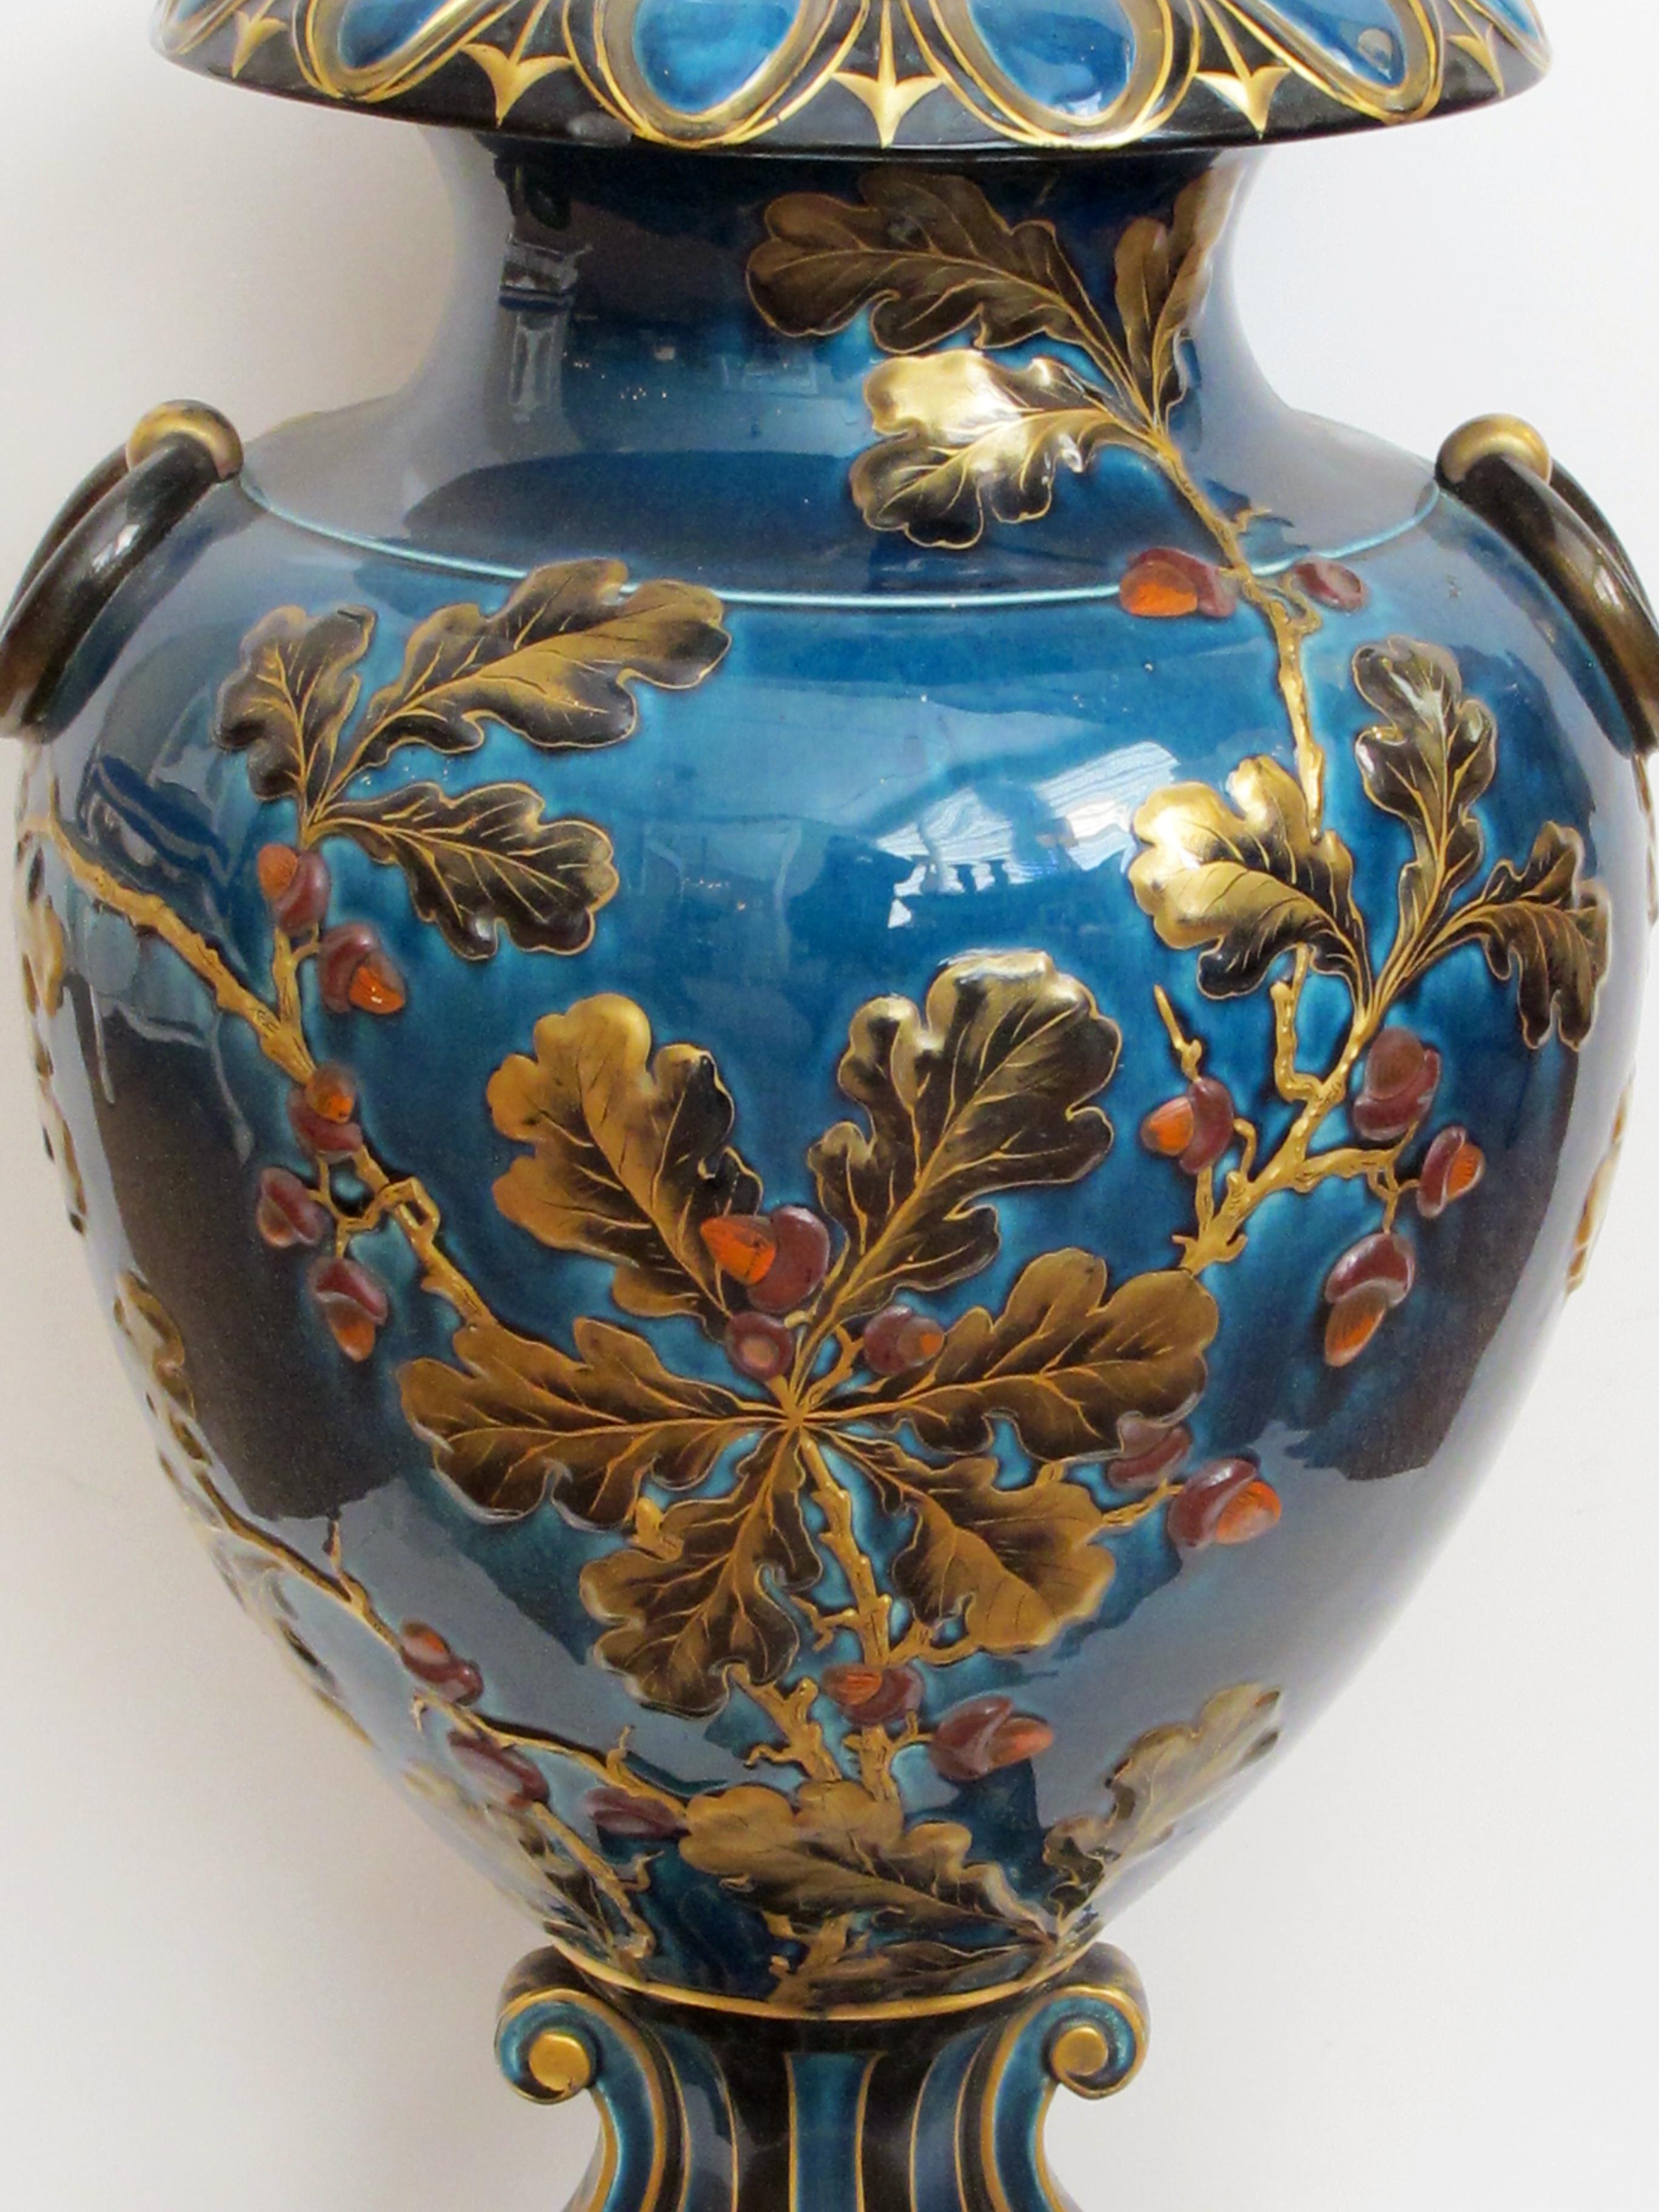 19th Century Large and Exquisitely Rendered English Teal-Glazed Ceramic Urn